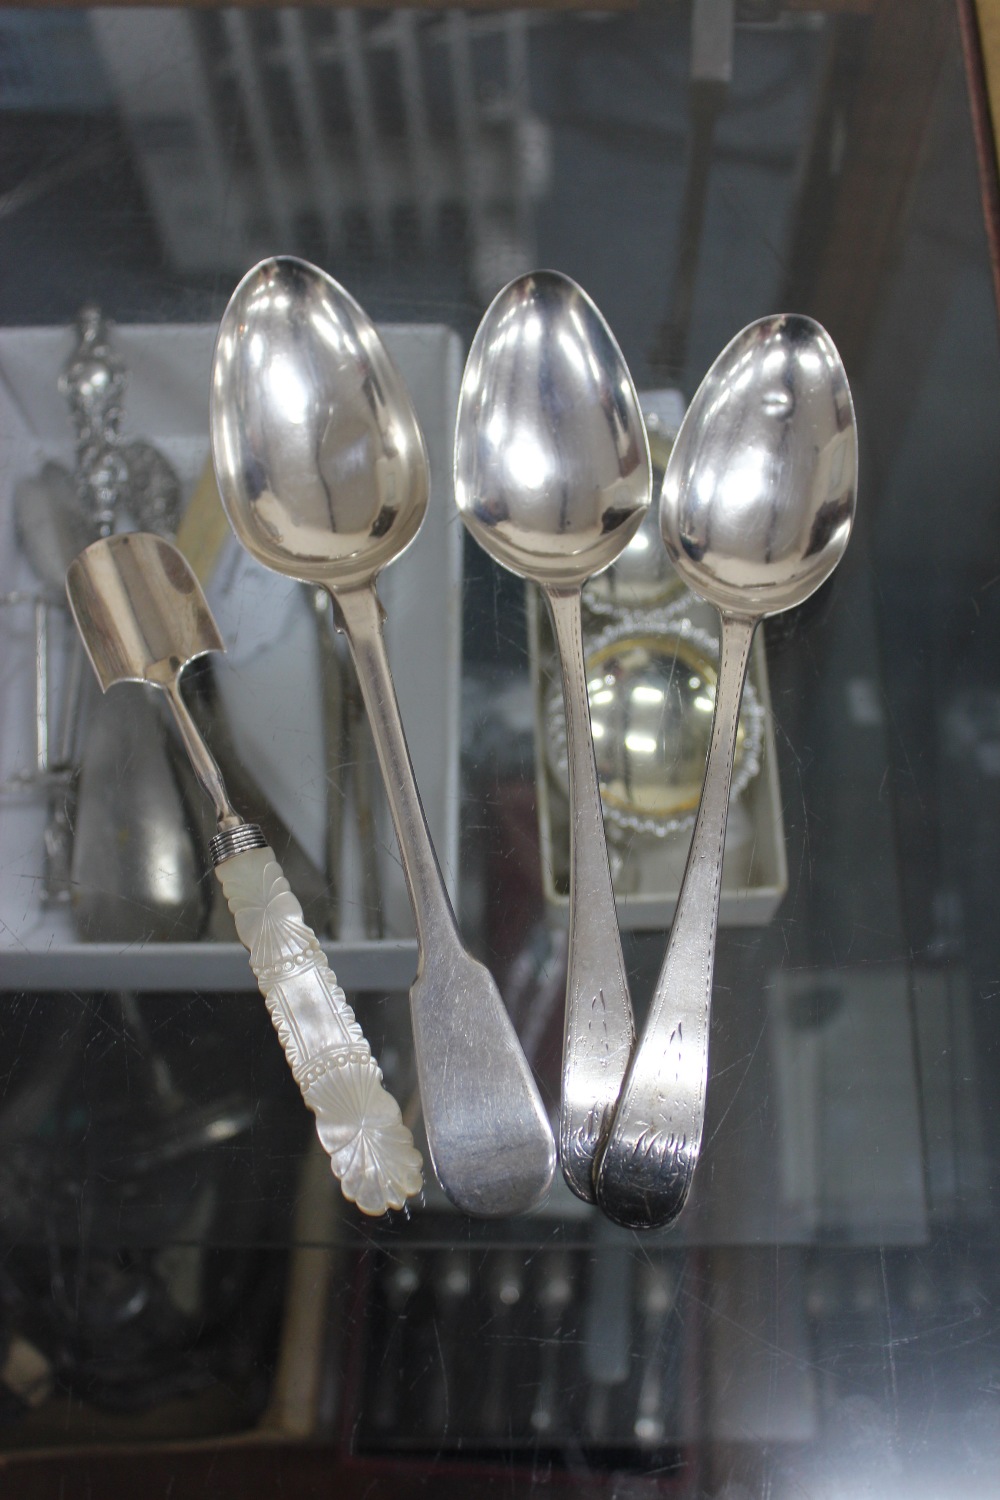 A GEORGIAN SILVER TABLESPOON marked with London 1821 makers mark of WEWF to go with various silver